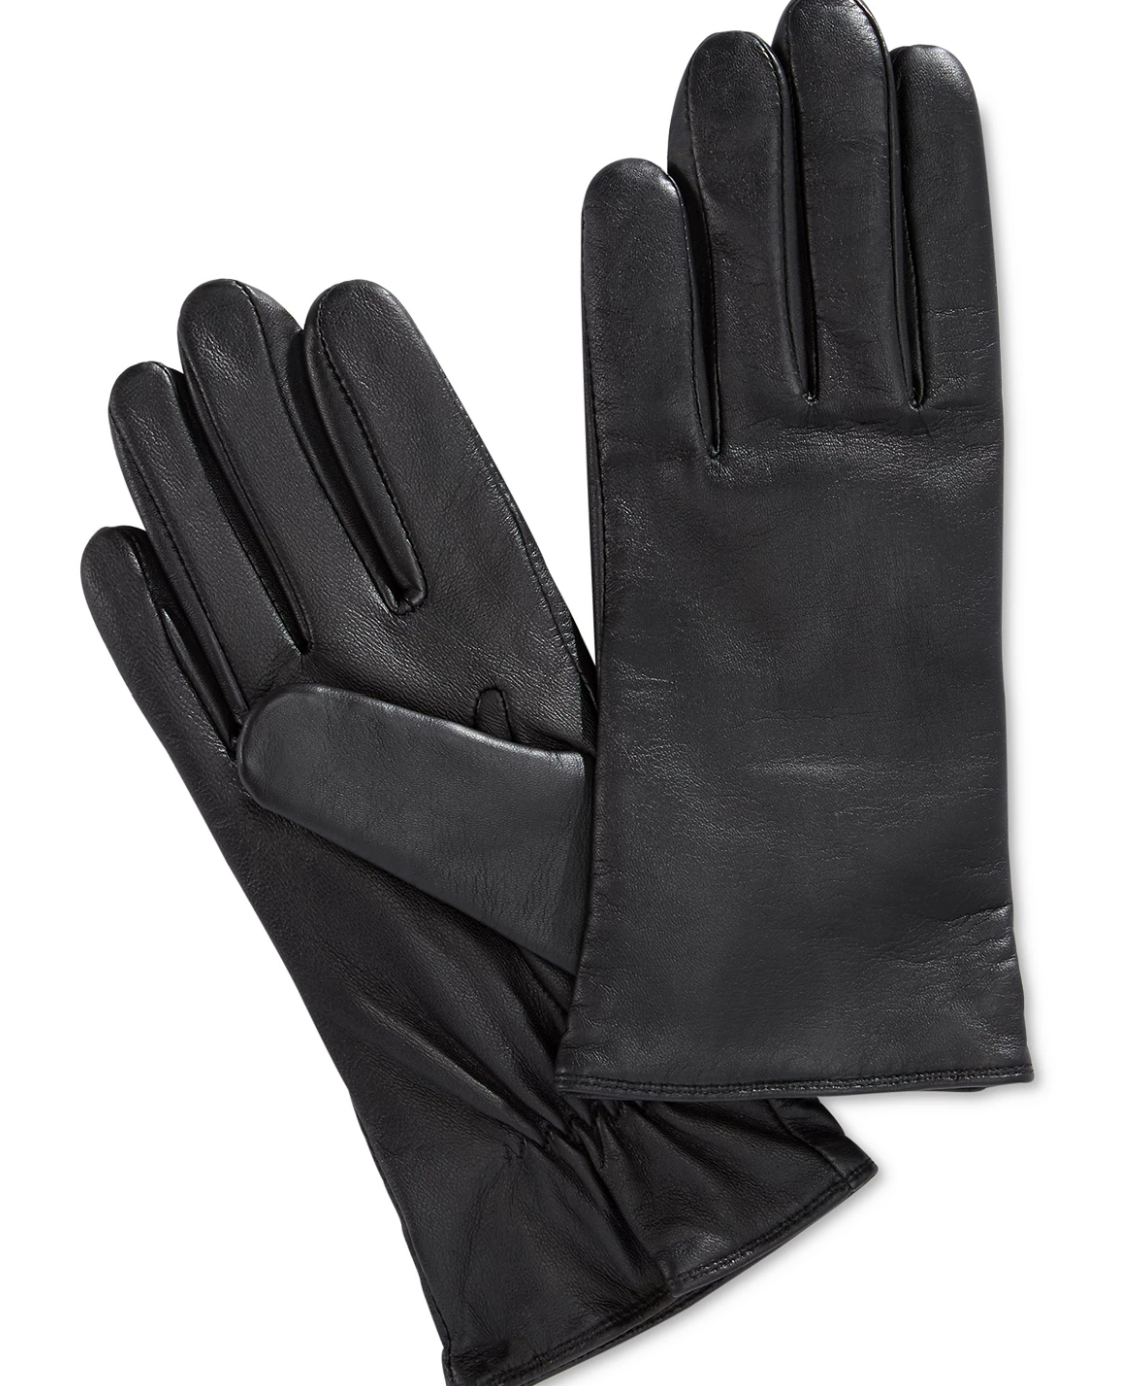 Cashmere Lined Leather Tech Gloves, Created for Macy's.png